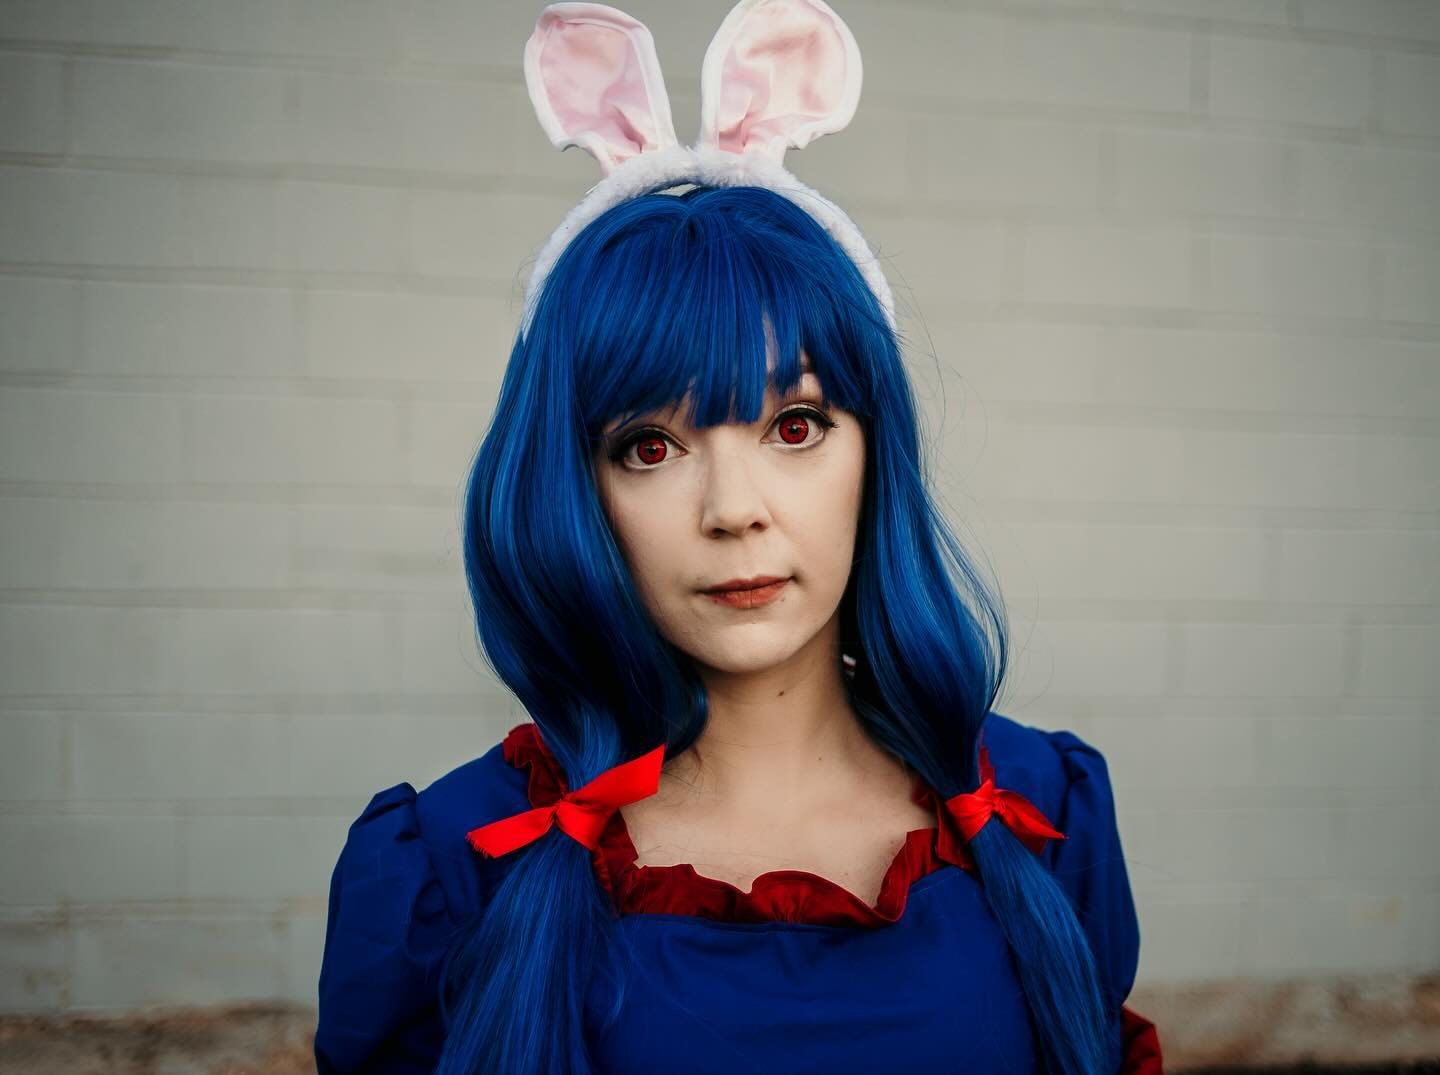 Tbh I wish I could wear circle lenses every day they make eyes look so COOL 😎 but my eyes would be wrecked lmao ✨
Photo by the magical @melmademagic 
Wig from @ardawigs 
Guitar is my baby @officialibanezguitars 
.
.
.
#Touhou #TouhouProject #TouhouC